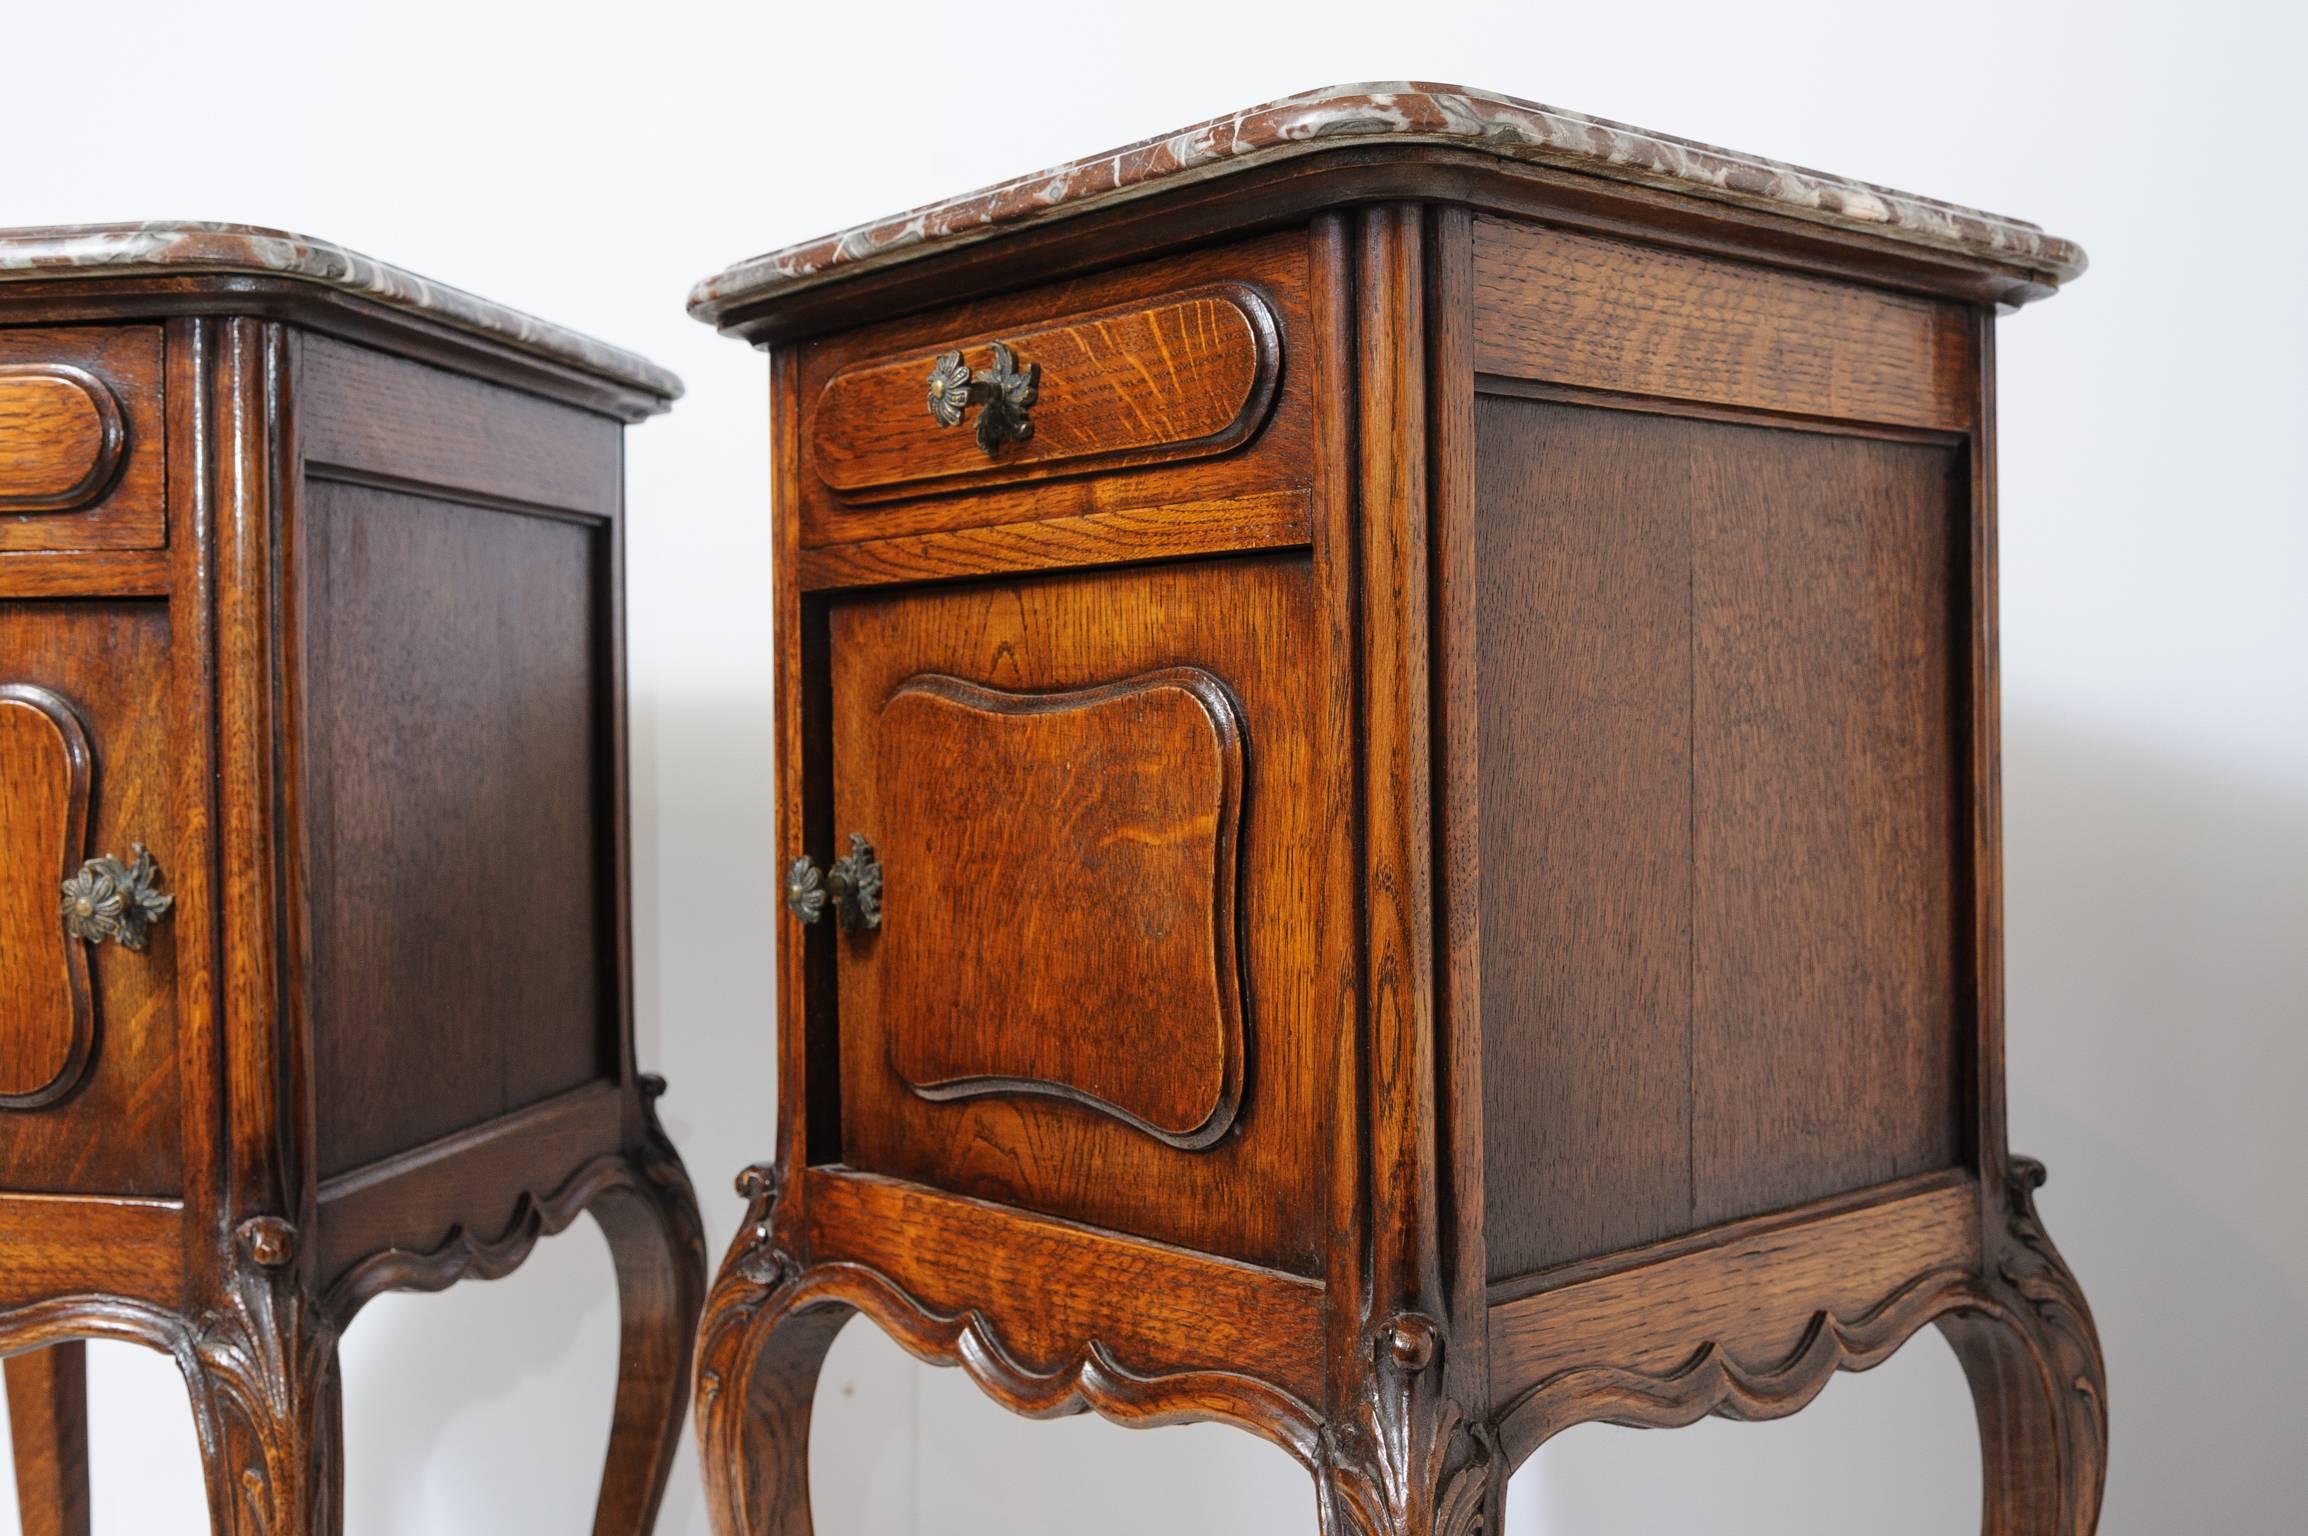 These are a very nice pair of solid oak French antique marble-top cabriolet legs night stands, circa 1890. Measurements: Each of these cabinets stand at 31